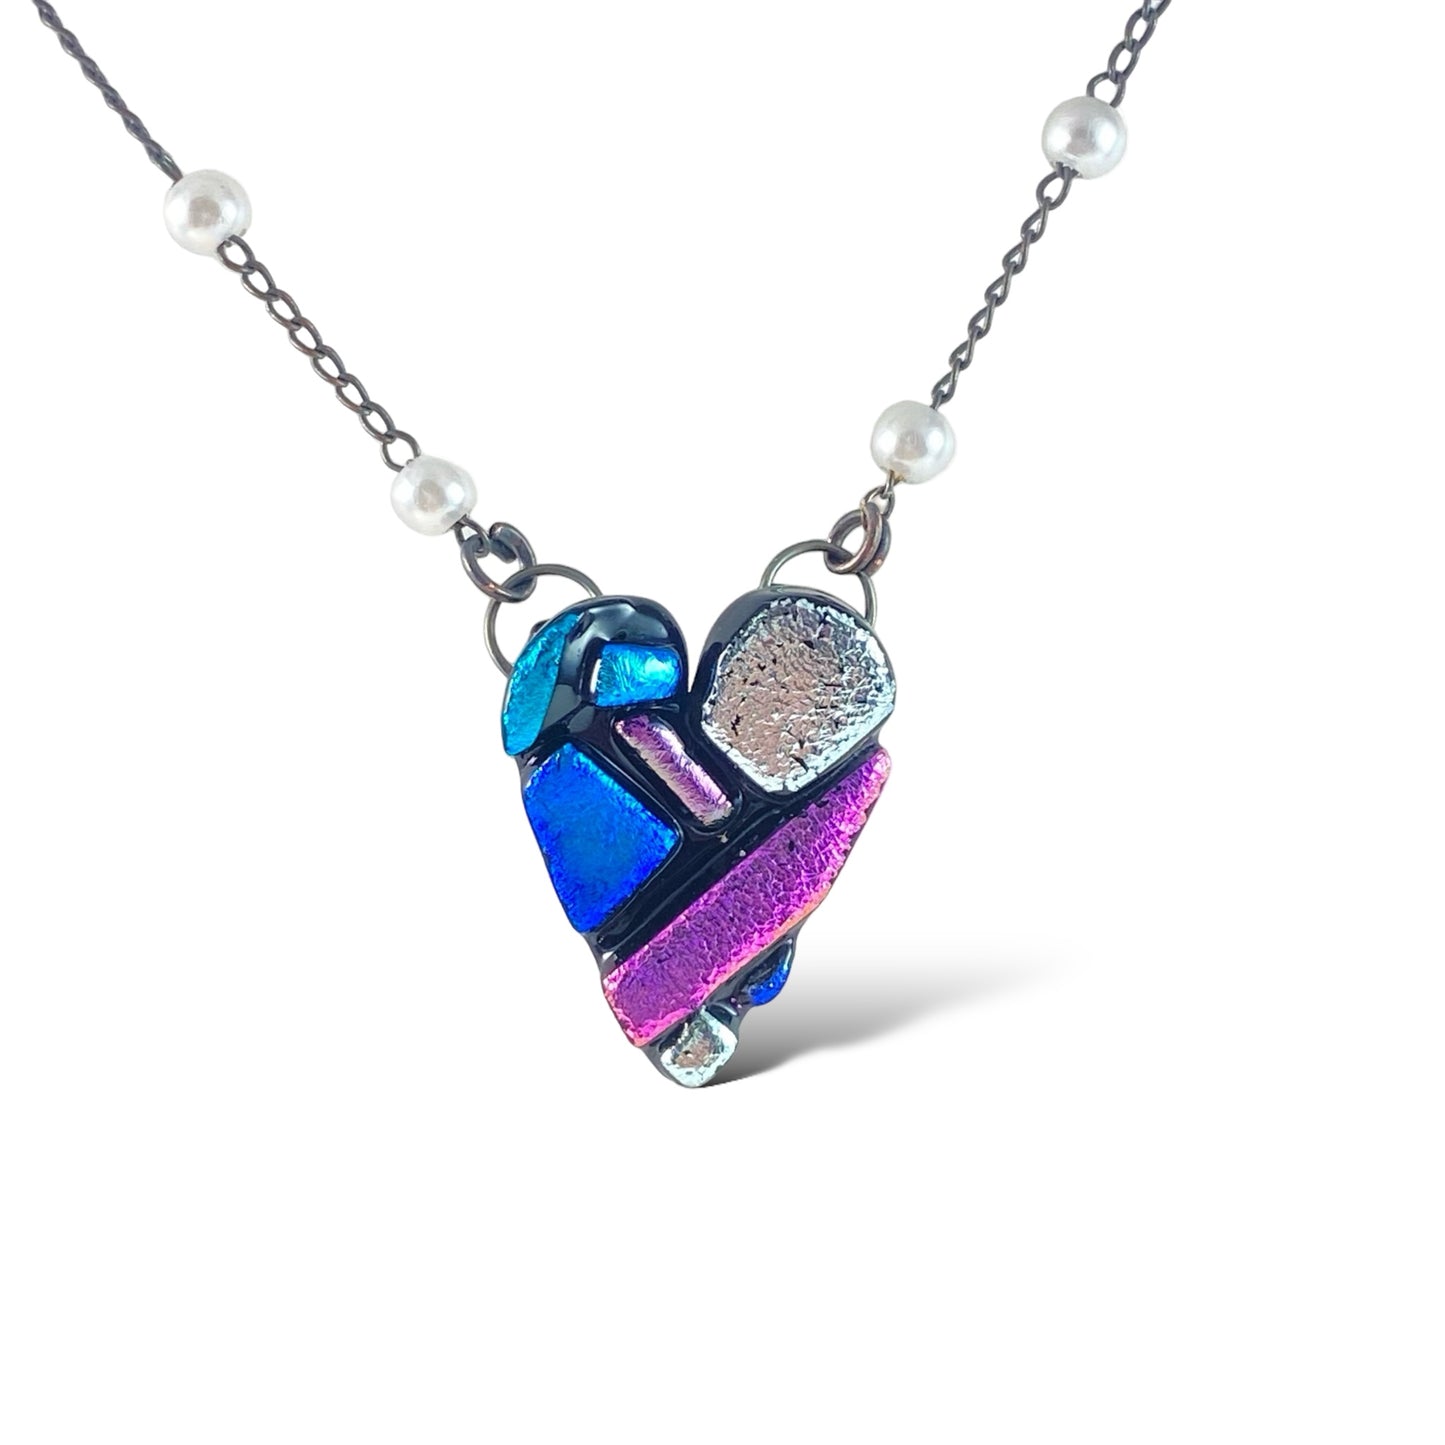 Dichroic Glass Heart Necklace in Black (a)